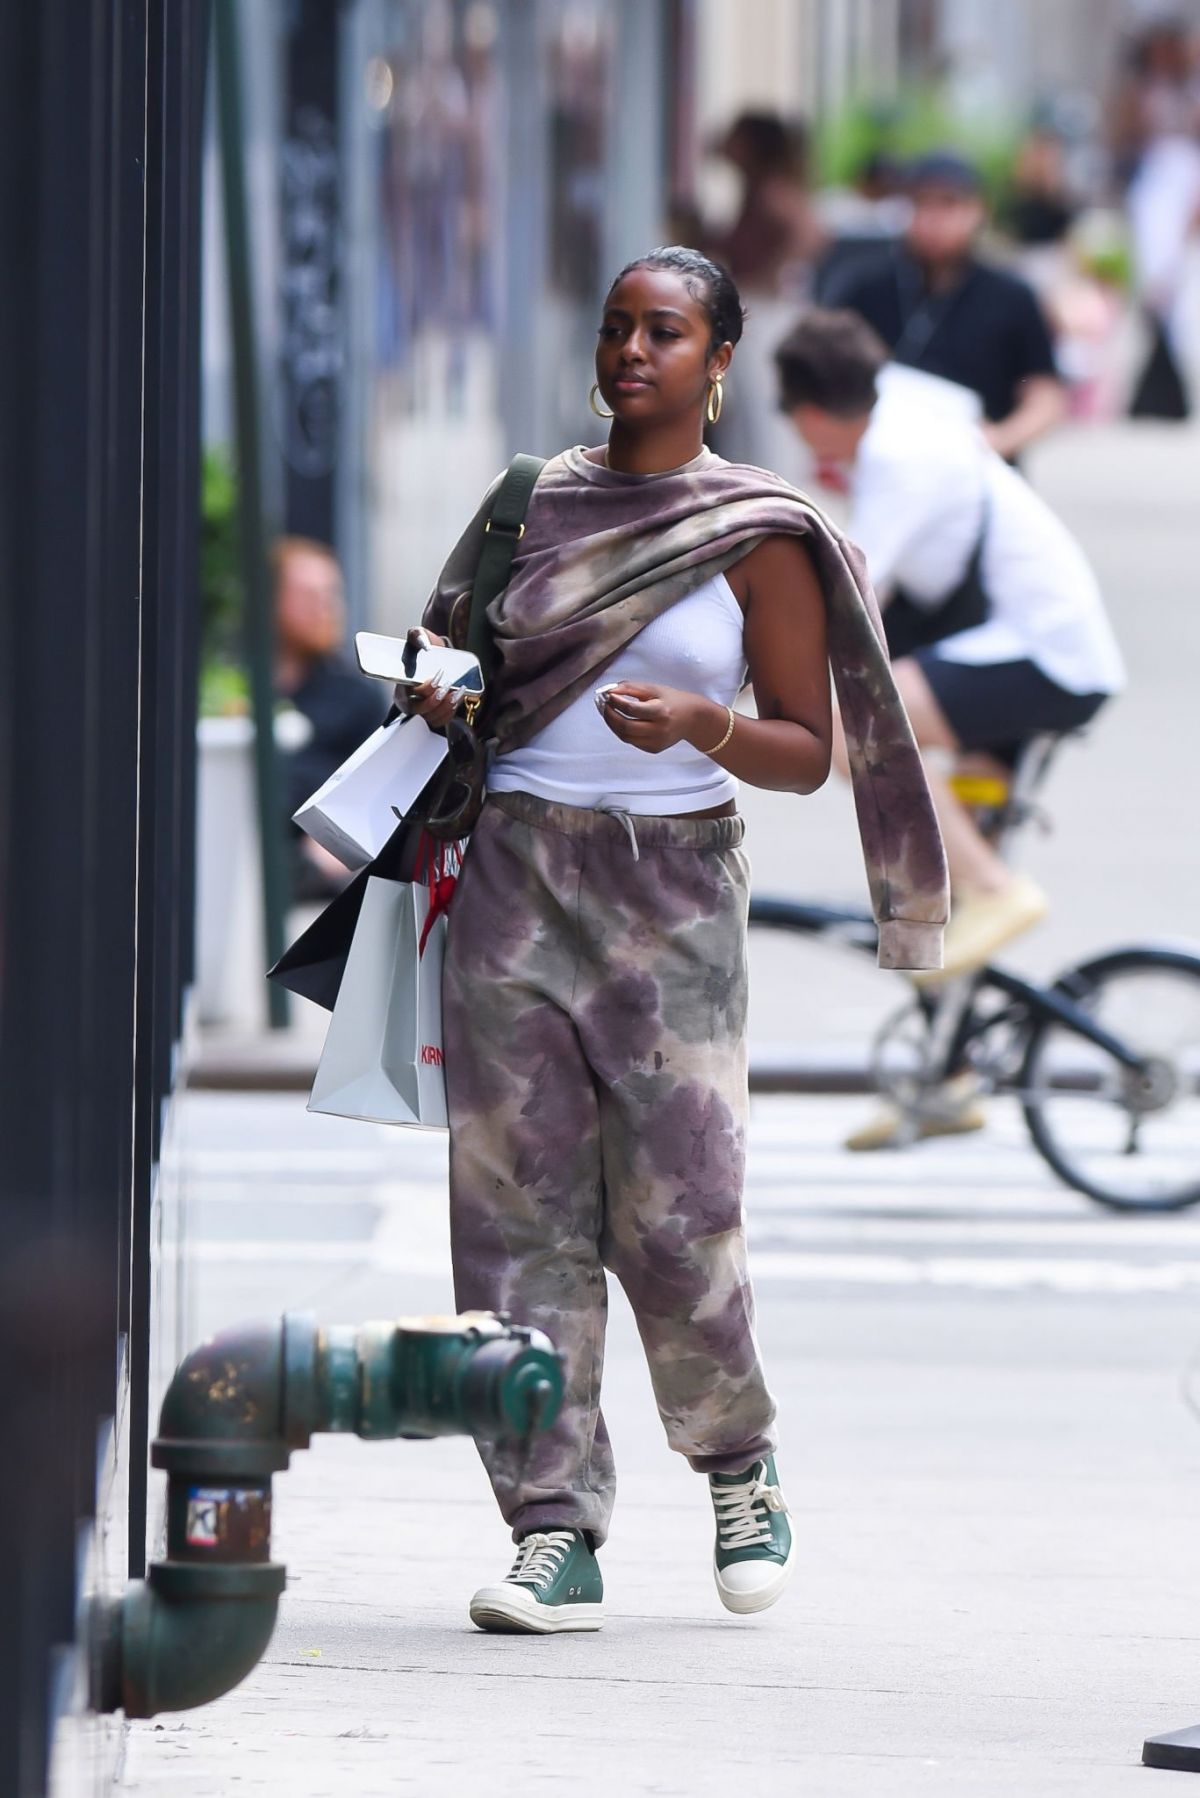 JUSTINE SKYE Out Shopping in New York 08/17/2022 – HawtCelebs